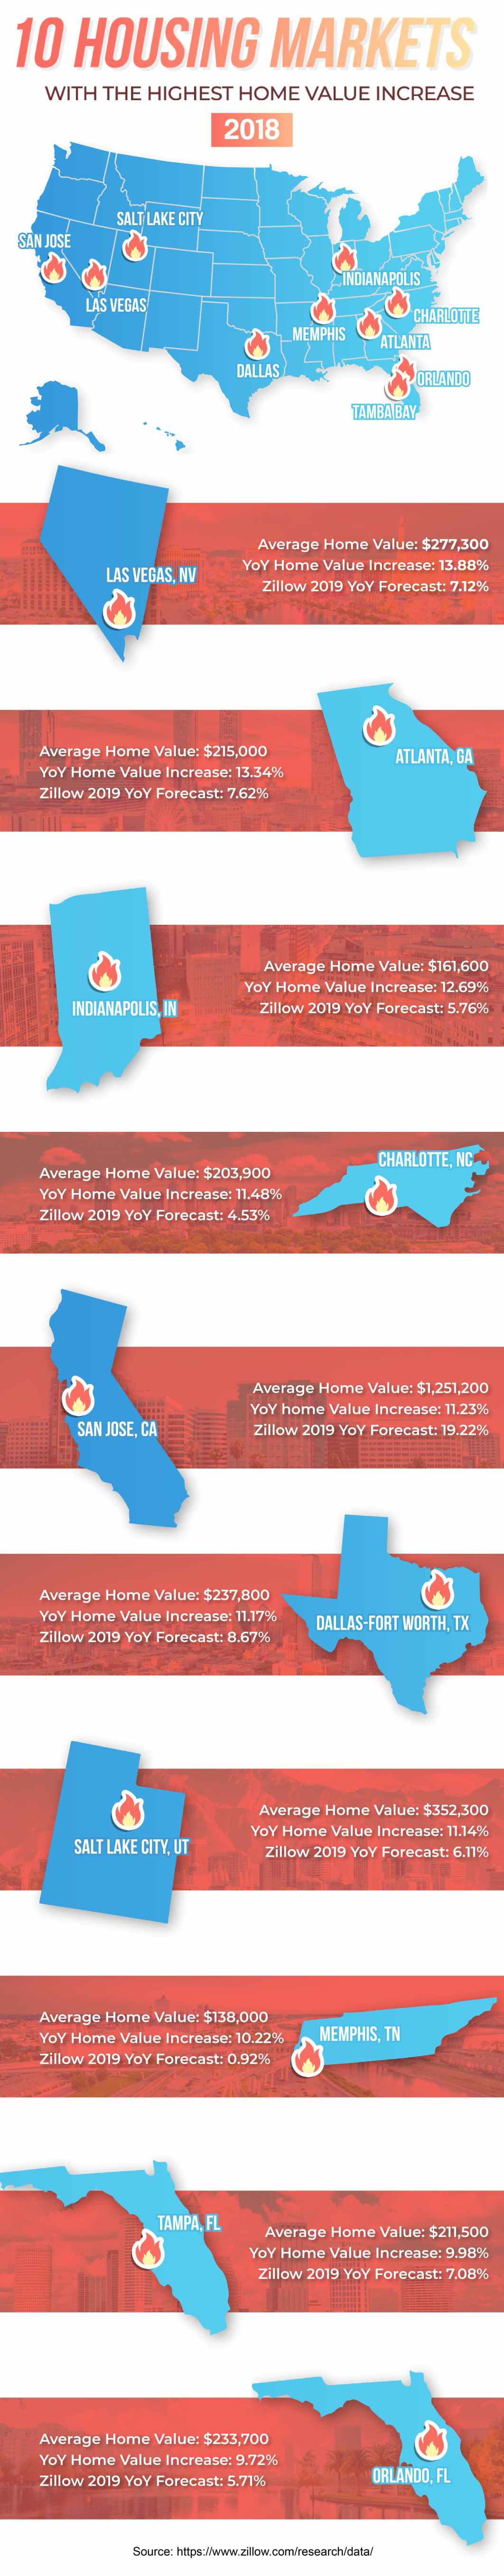 housing markets with high value increases